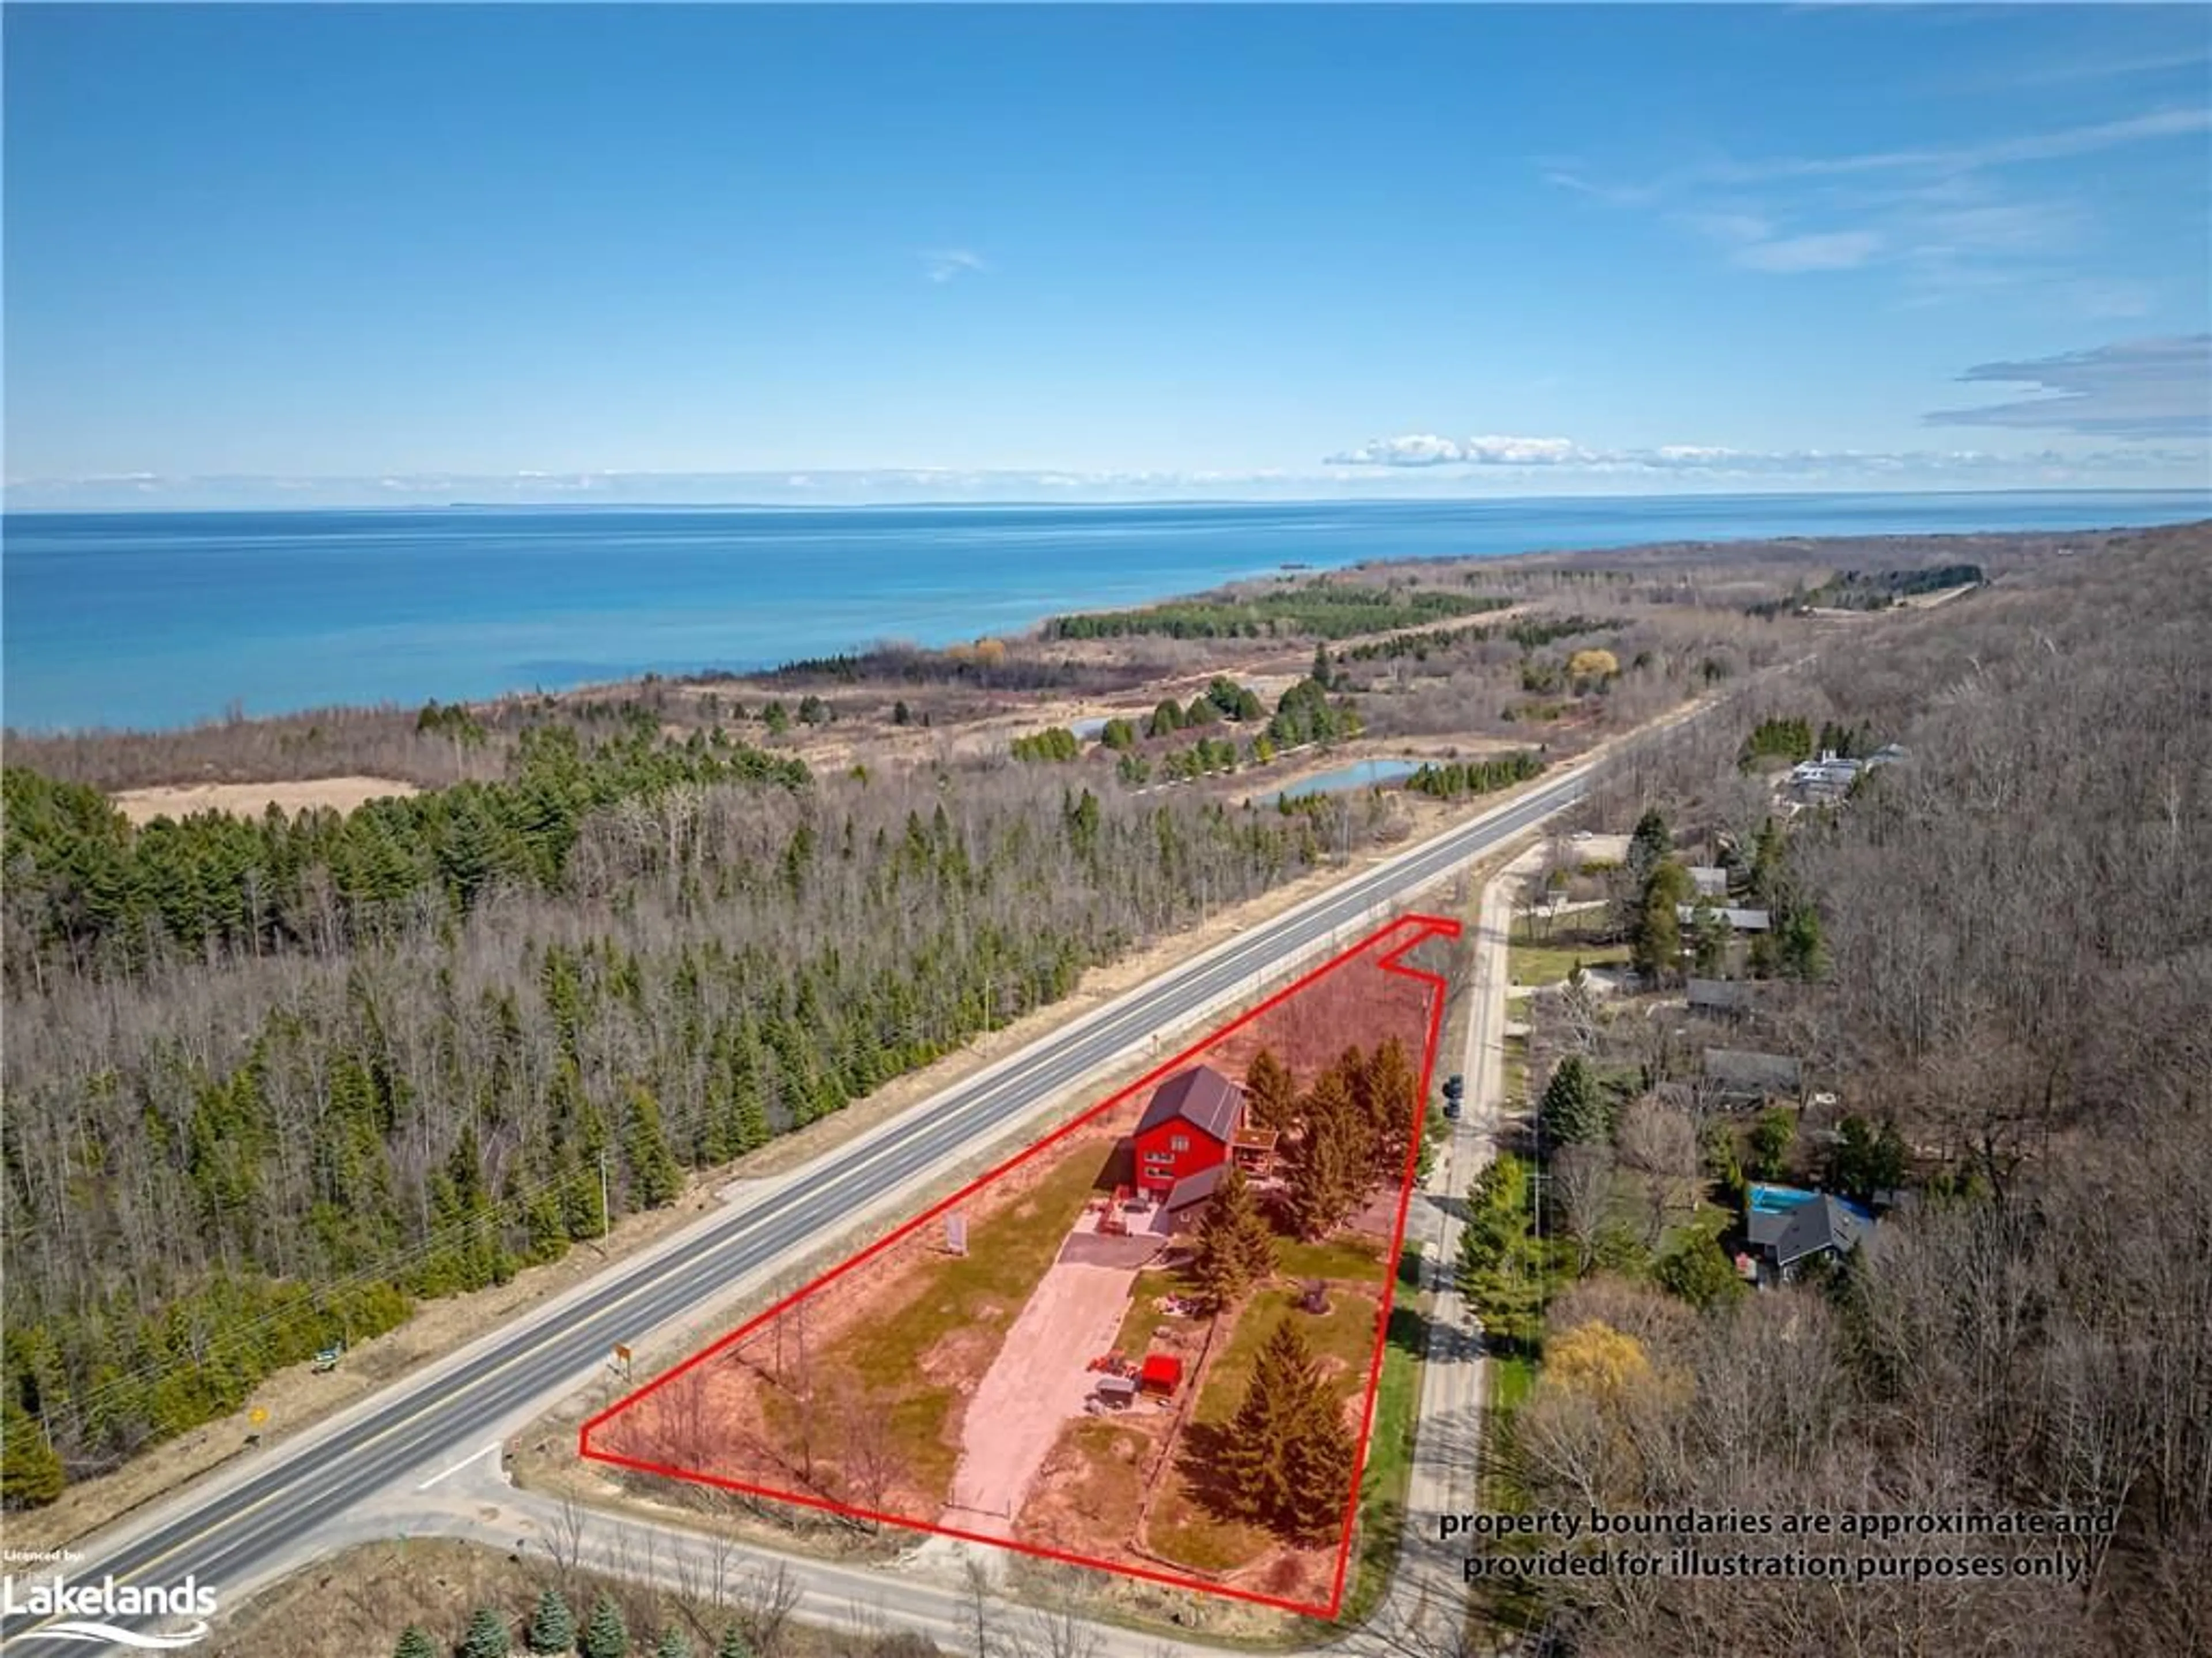 Lakeview for 121 Old Highway #26, Meaford Ontario N4L 1W7